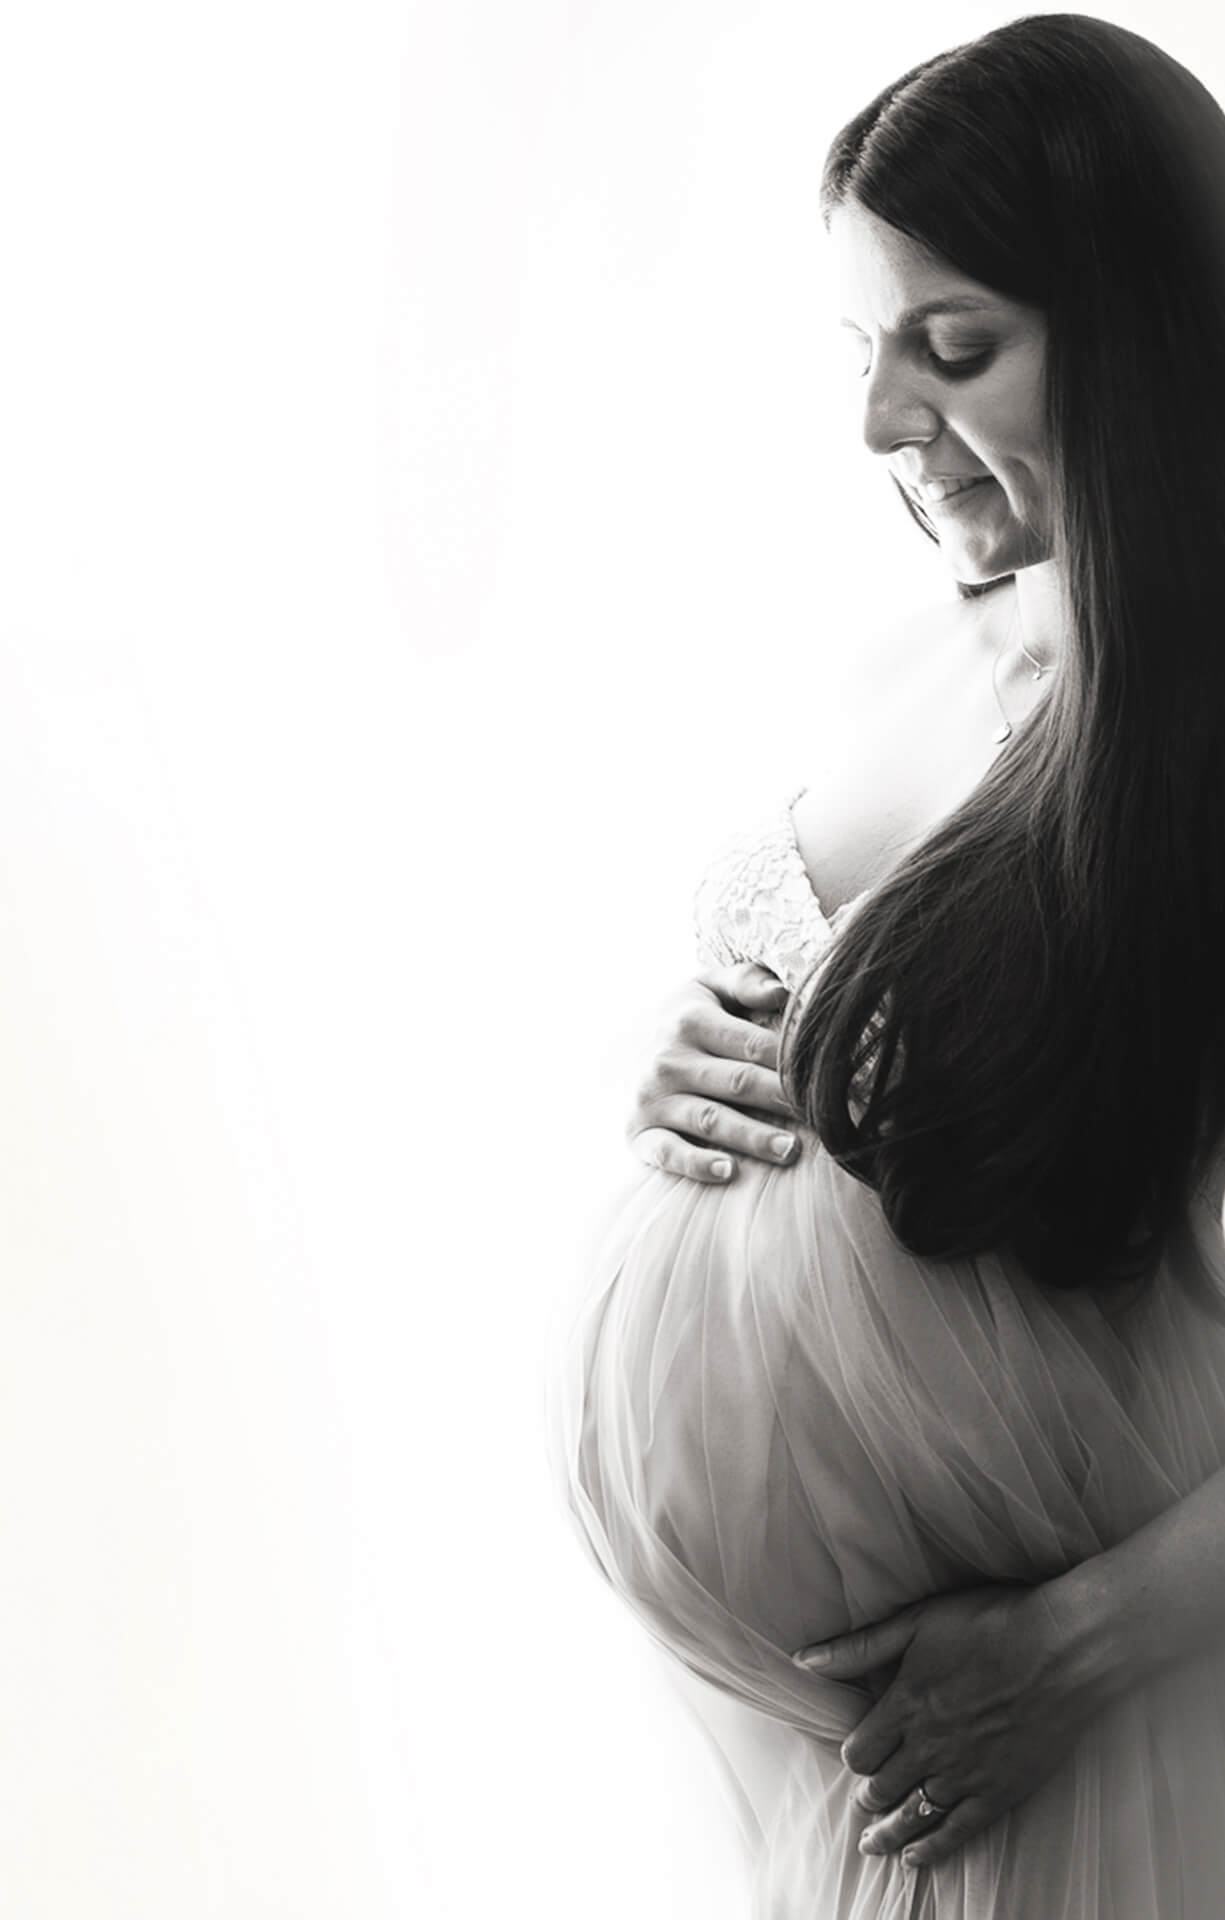 Photo of a pregnant lady black and white image showing her bump